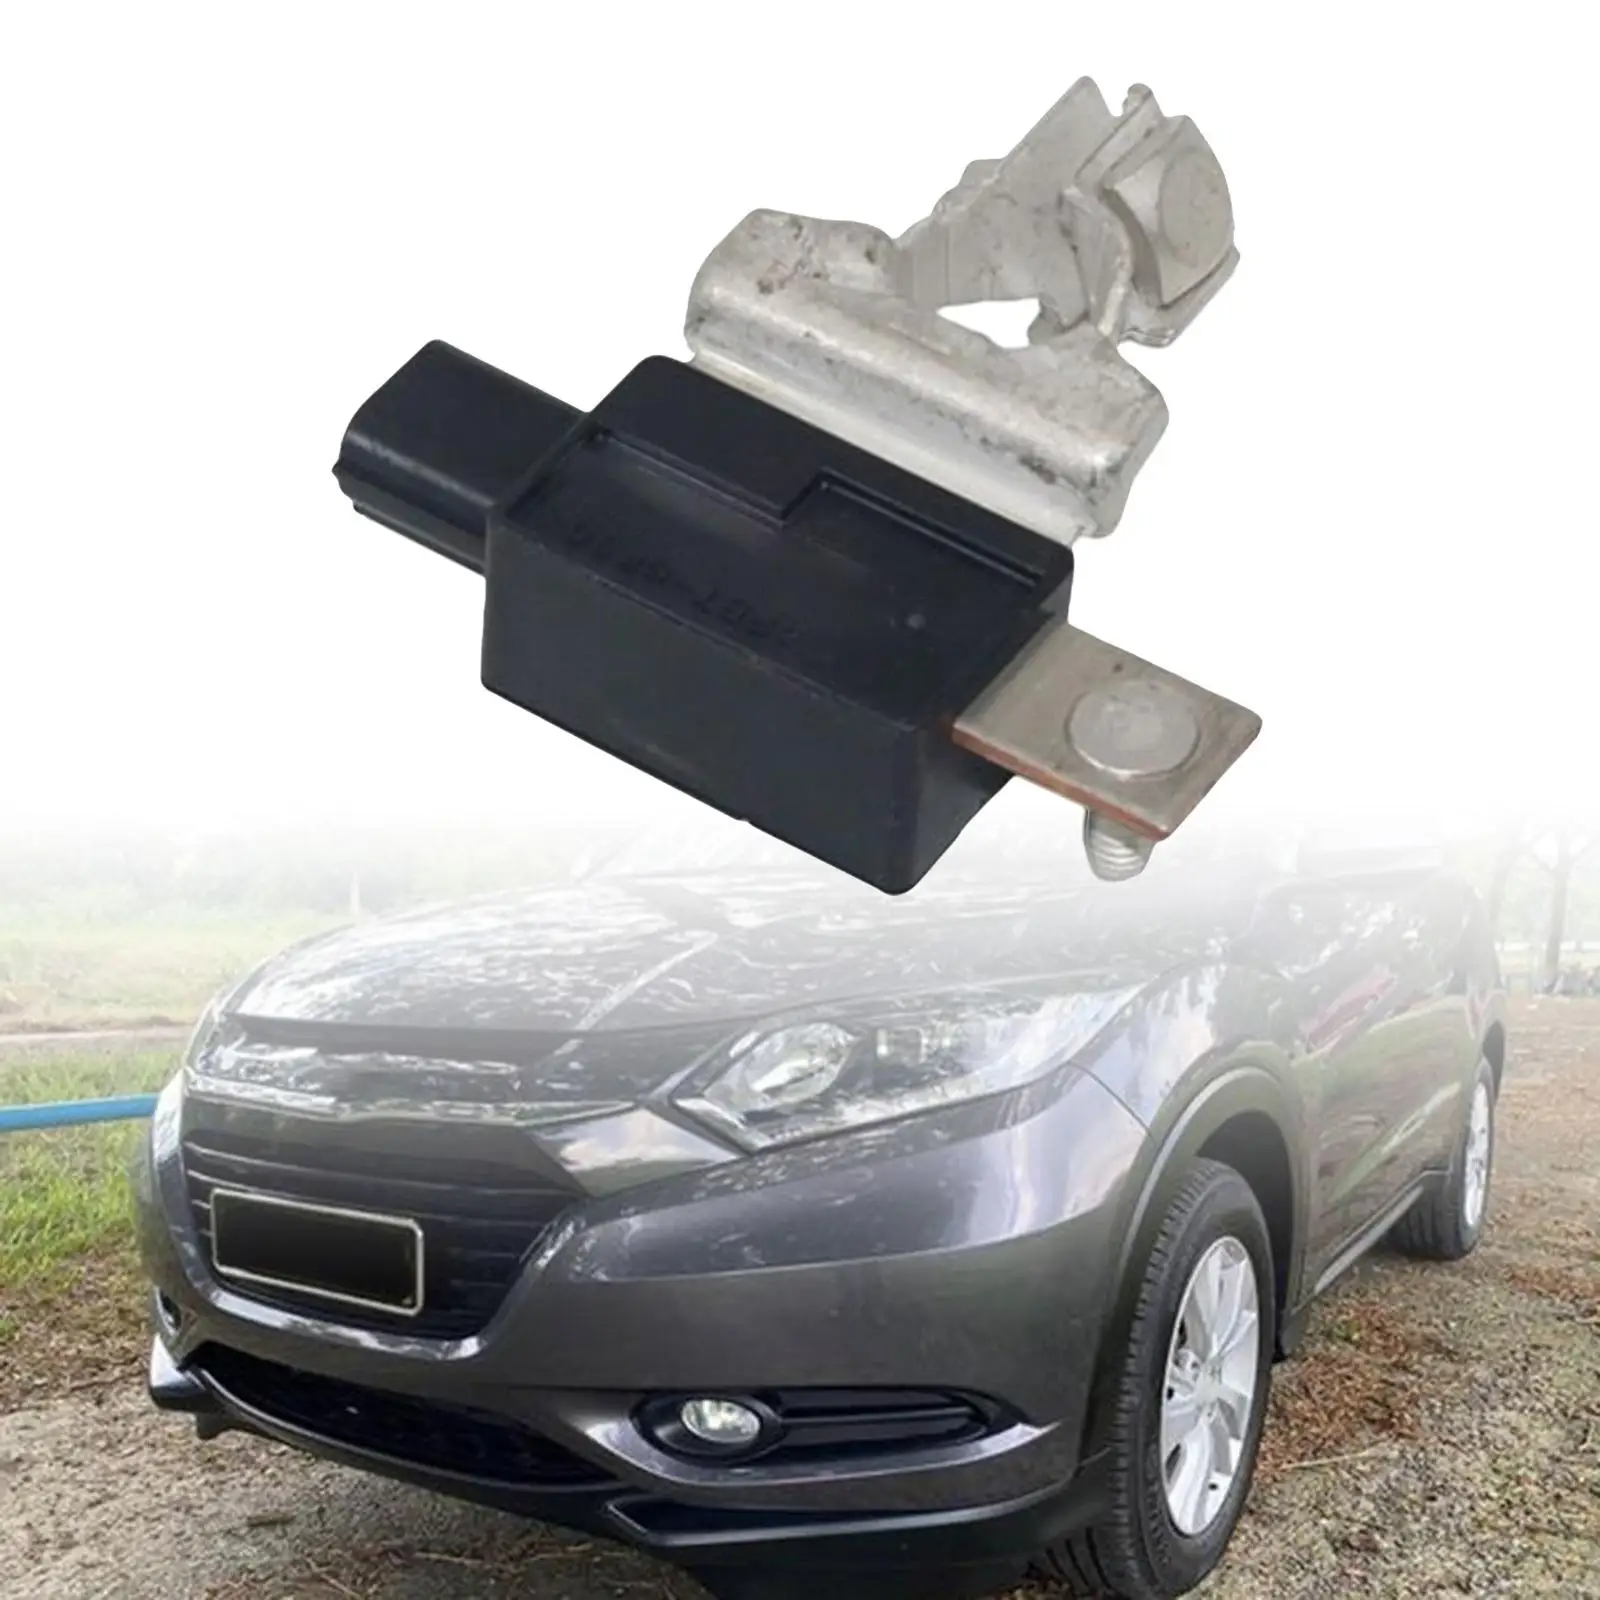 

Auto Battery Current Sensor 38920-T5A-A01 Parts Replacement Easy to Install Professional Durable for Honda Hr-V 2016-2018